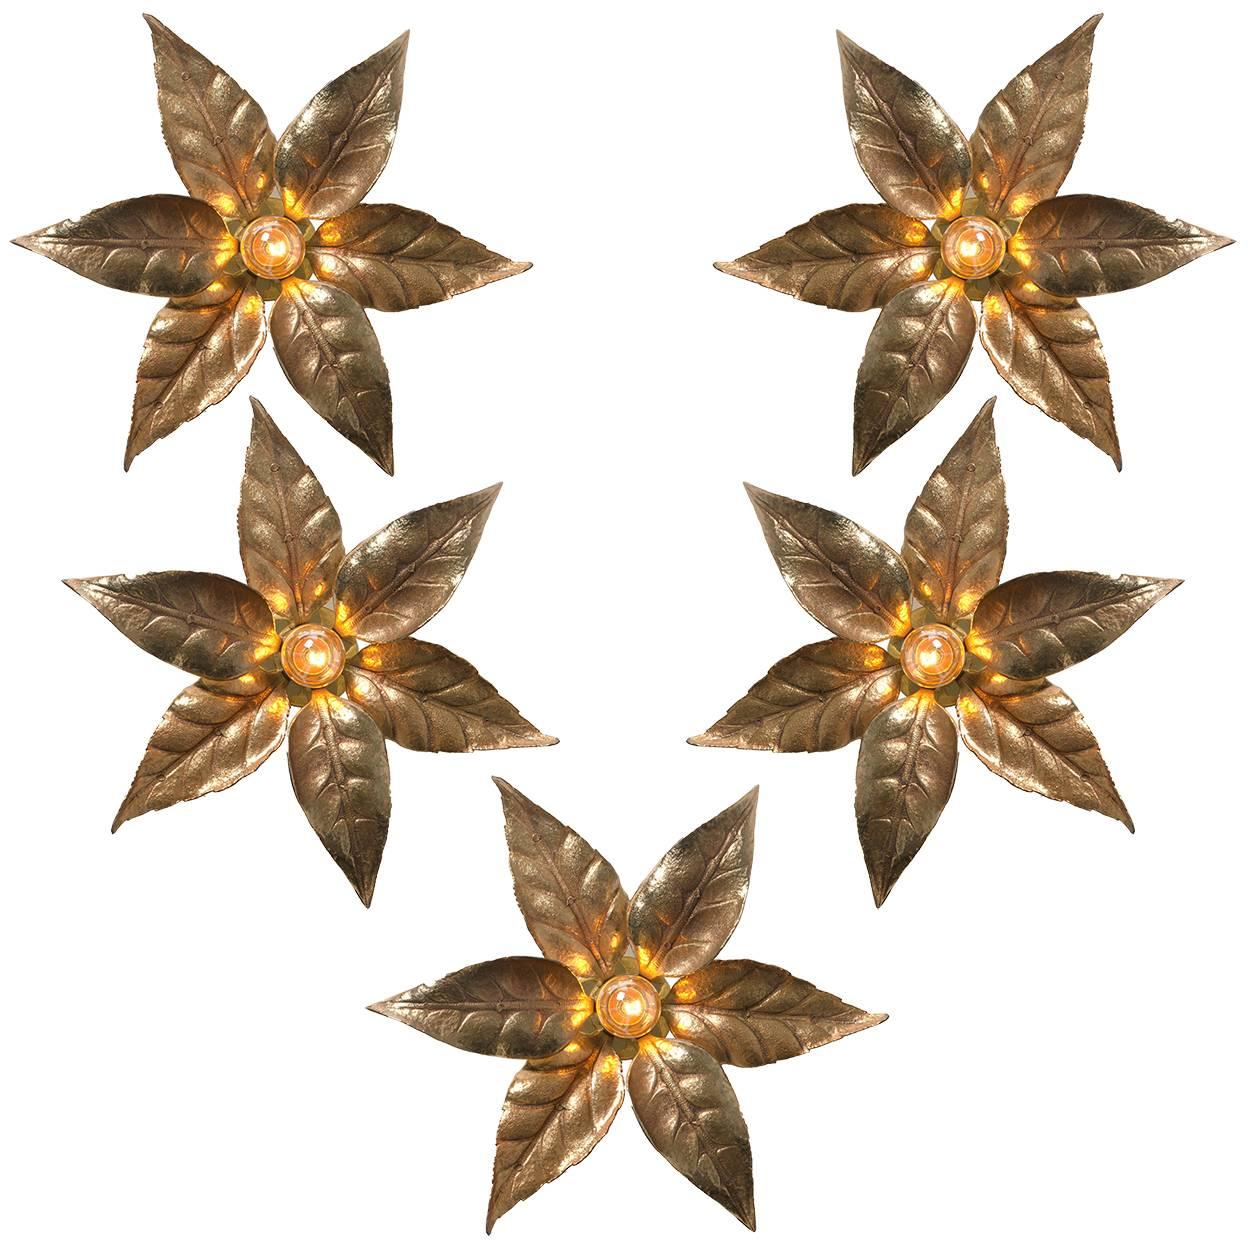 Of five brass flowers wall lights in the style of designer Willy Daro manufactured by 'Massive Lighting', circa 1970s, Belgian. This decorative and beautiful large sculptural light consists brass plated flowers on a circular base of the same finish.